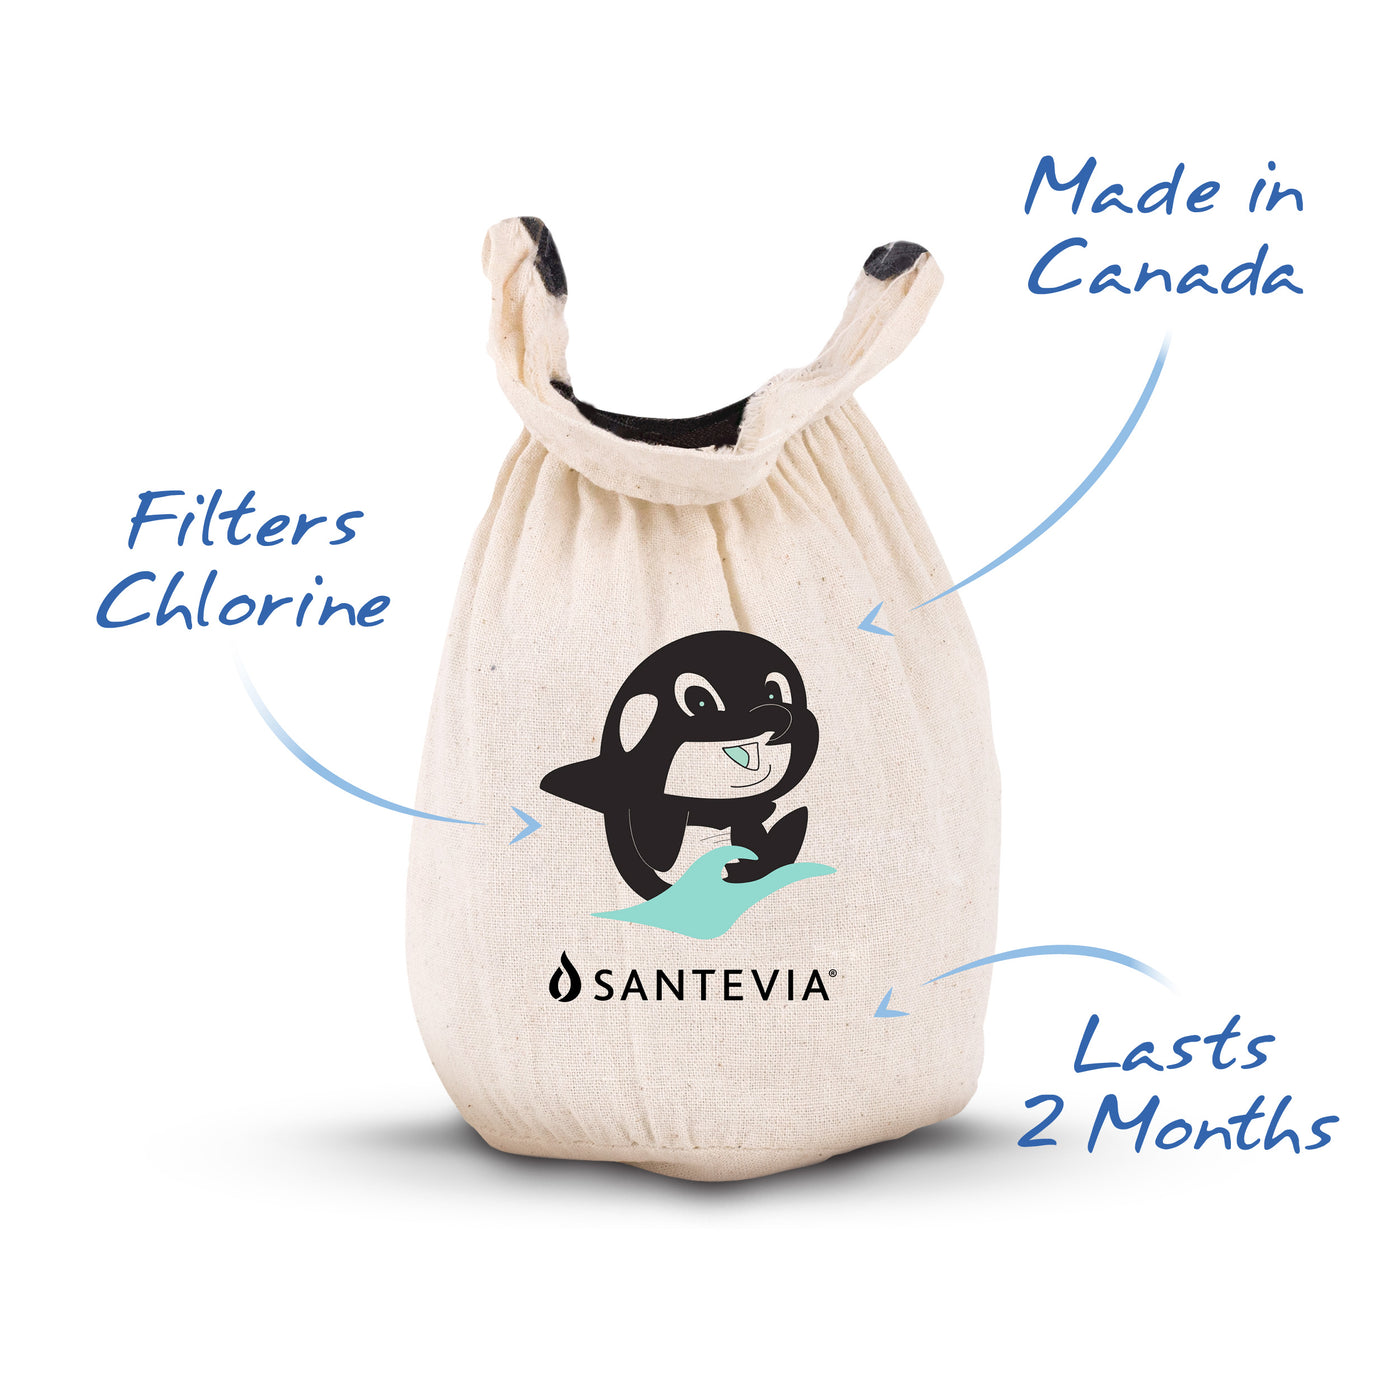 The Santevia Bath Filter is made in Canada, Filters Chlorine, and Lasts 2 Months